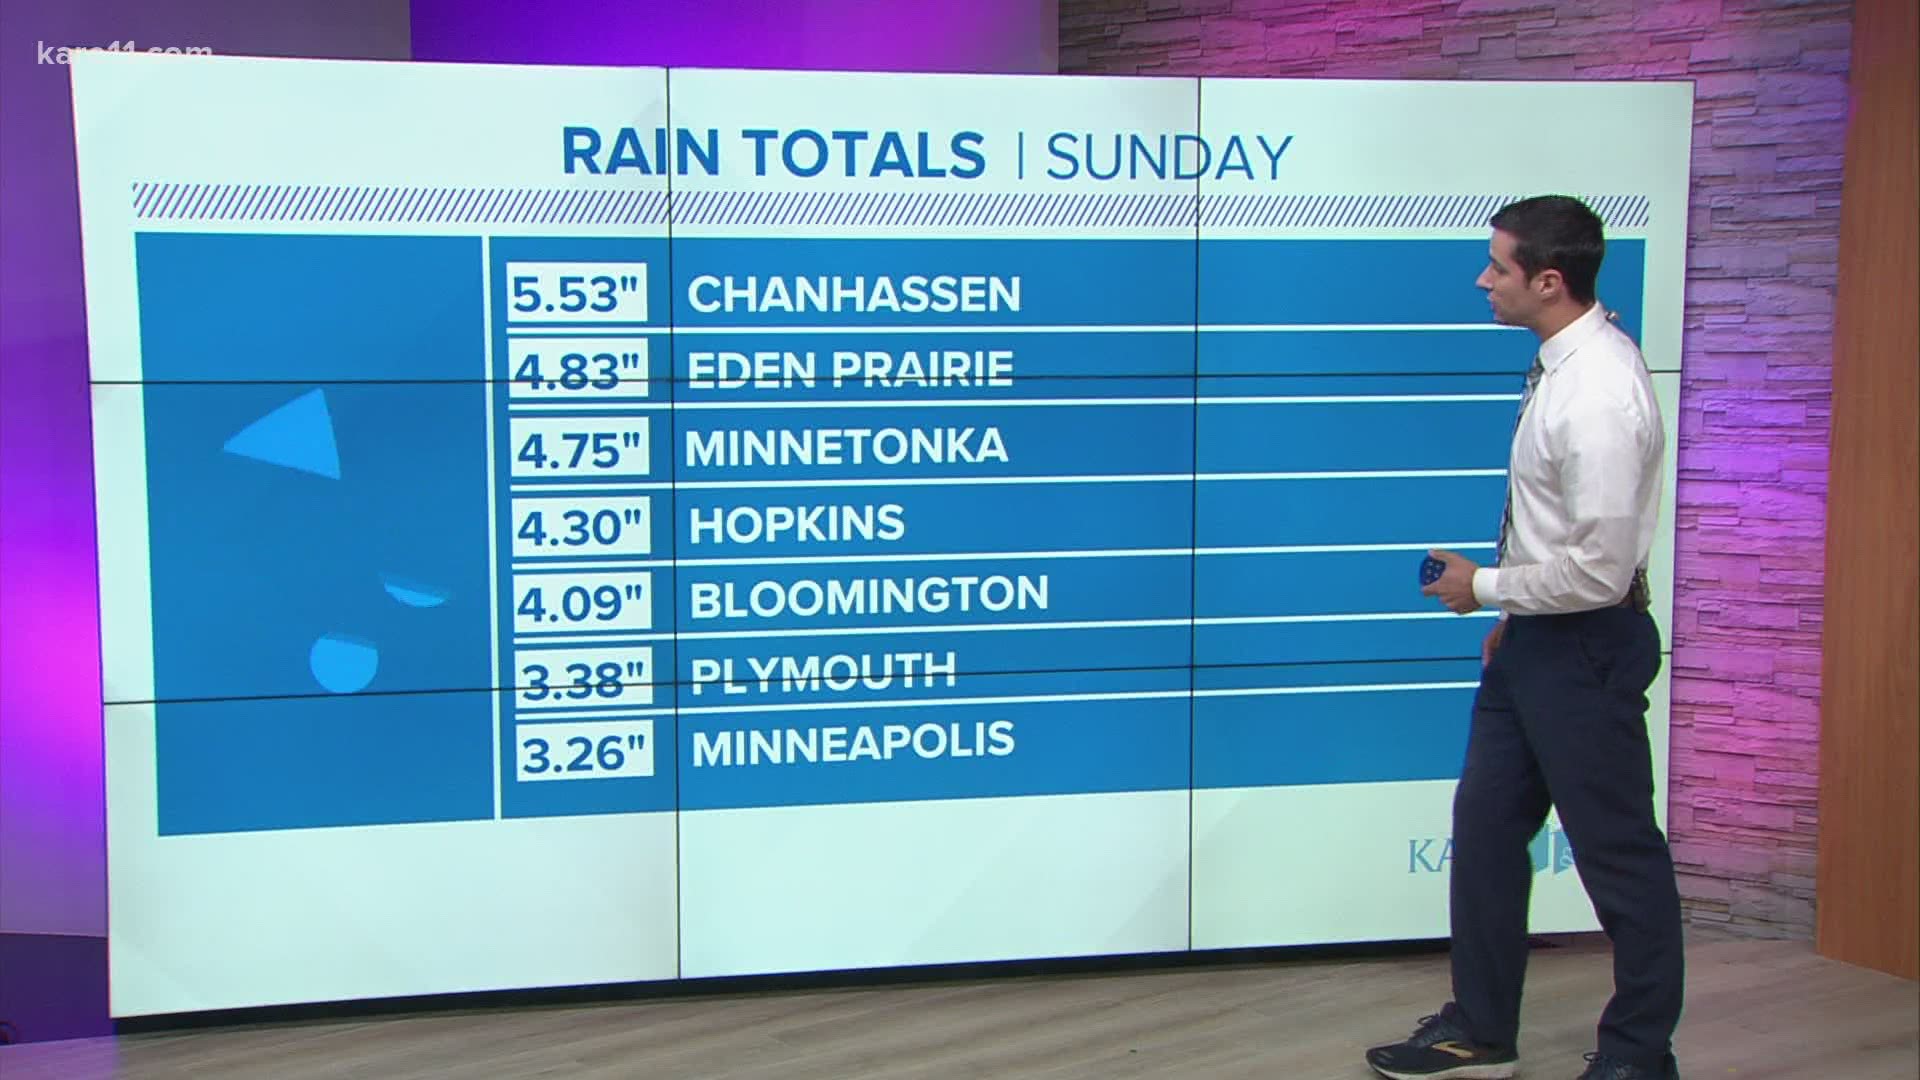 KARE 11 meteorologist Ben Dery talks about the rain totals across the state, where some saw more rain in a few hours than the average for the entire month.